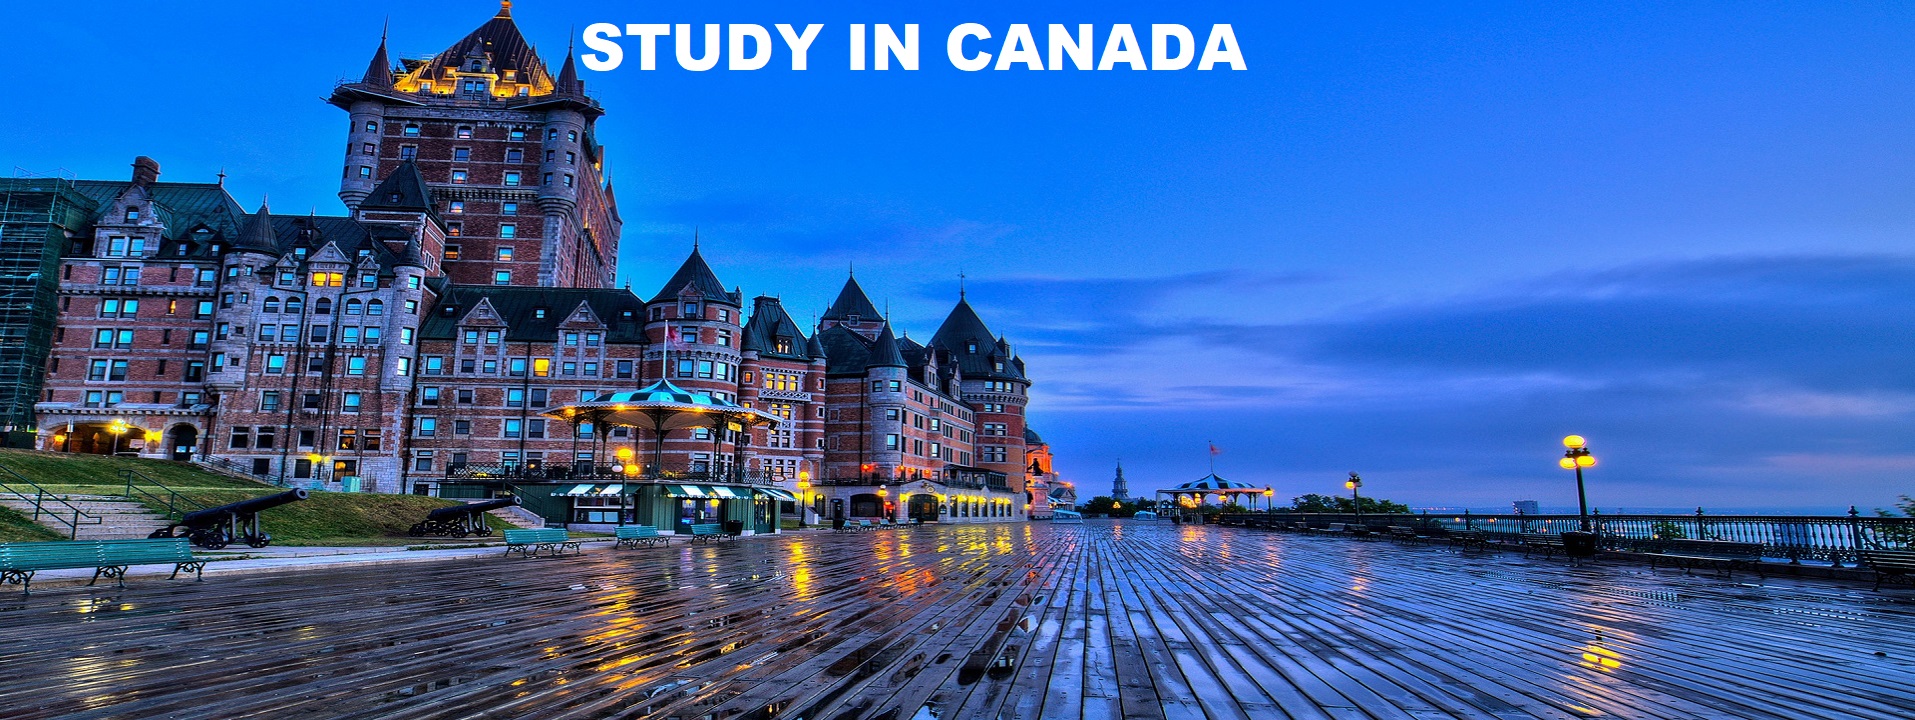 MBBS Study Canada | Abroad Education Consultants Canada | Canada student visa consultants Delhi | Masters Study Canada | Study MBA Canada